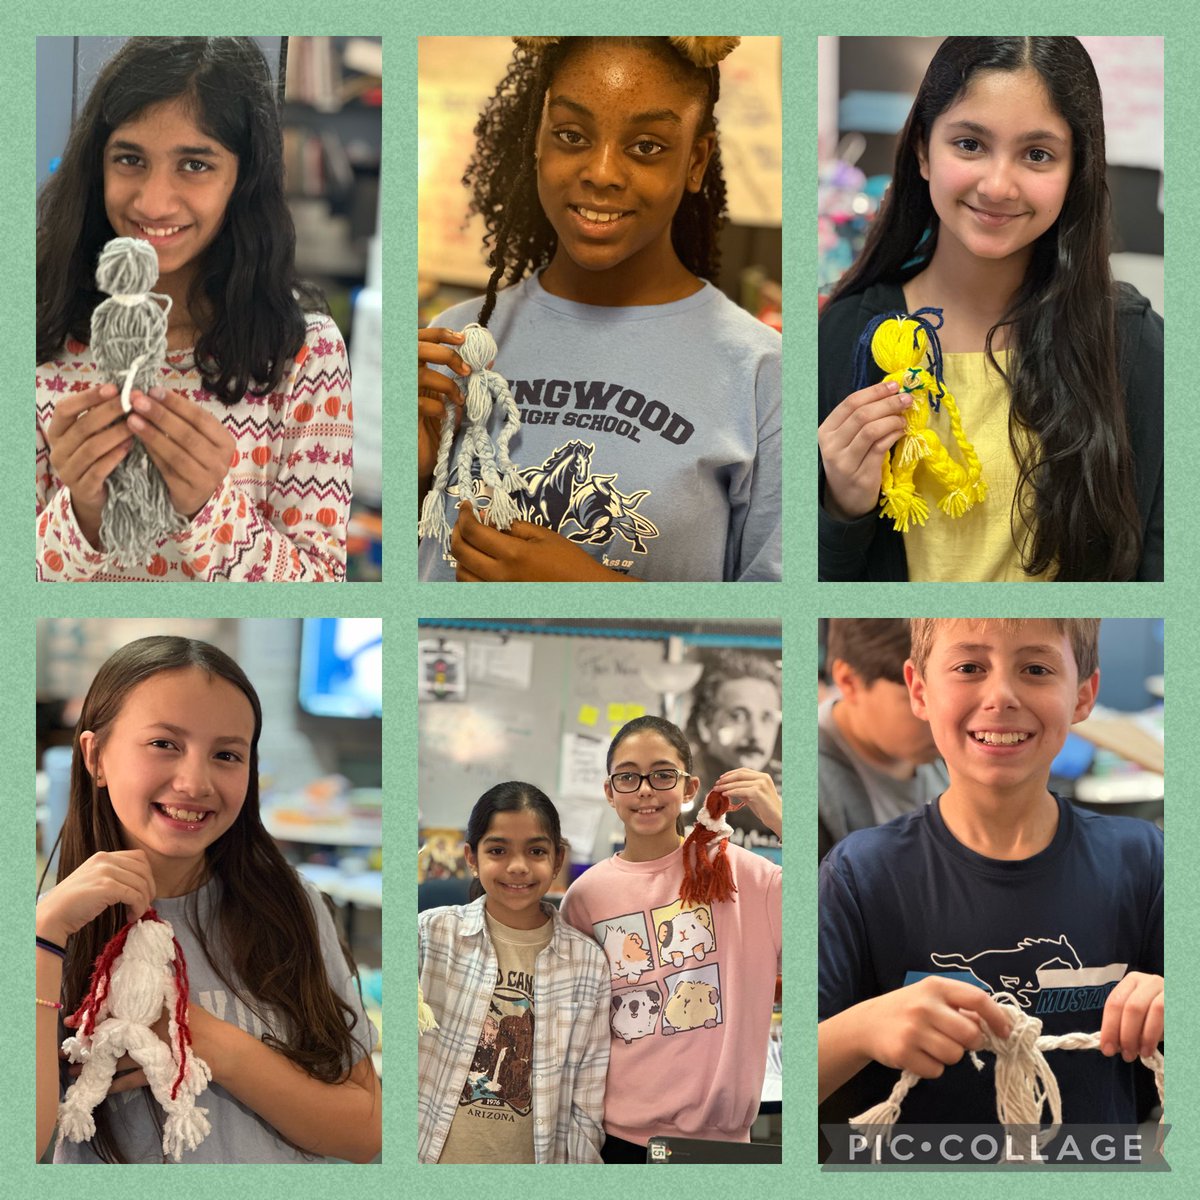 Making the yarn dolls described in #EsperanzaRising is a favorite activity in our celebration of learning! @MMorrisonMEd @HumbleISD_SFE @PamMunozRyan